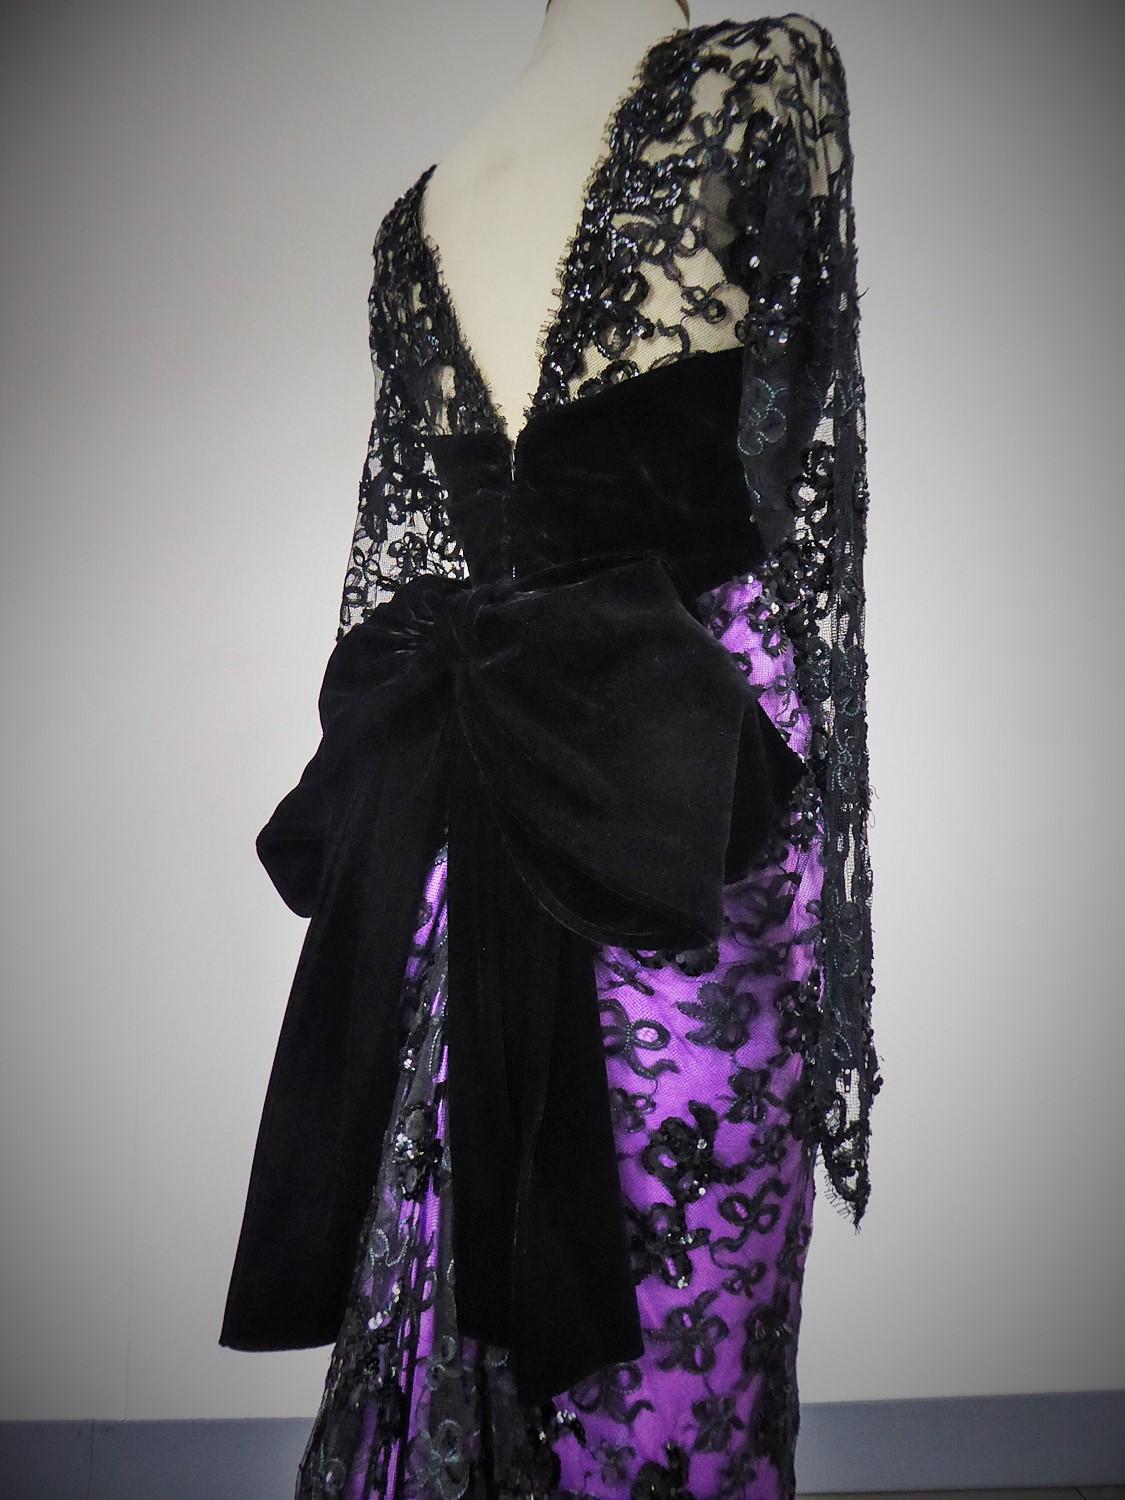 Yves Saint Laurent Couture Evening Gown Lace and Satin n. 59501 Collection 1985 6